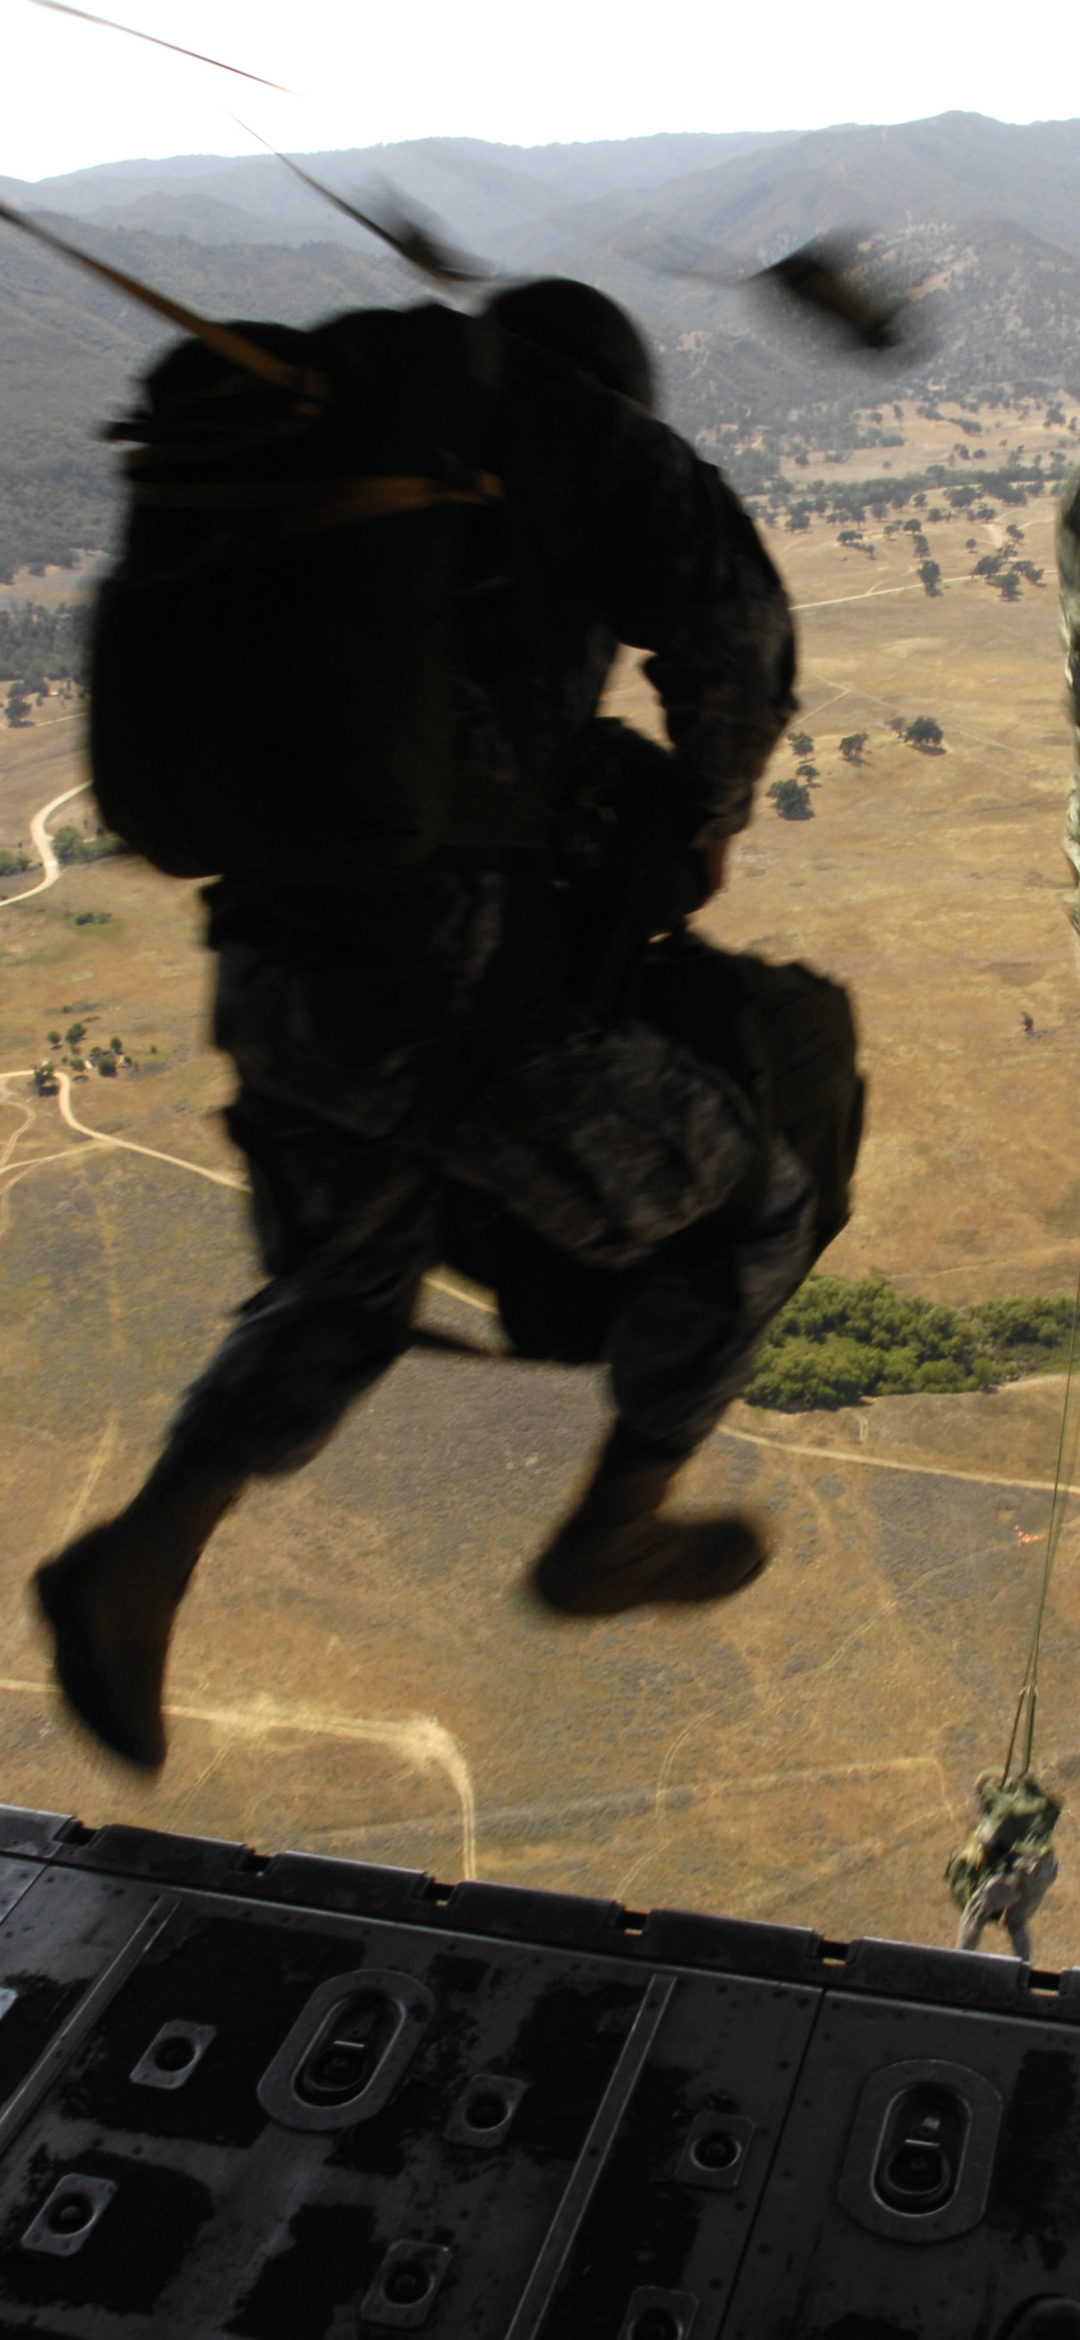 military, soldier, parachuting, paratrooper